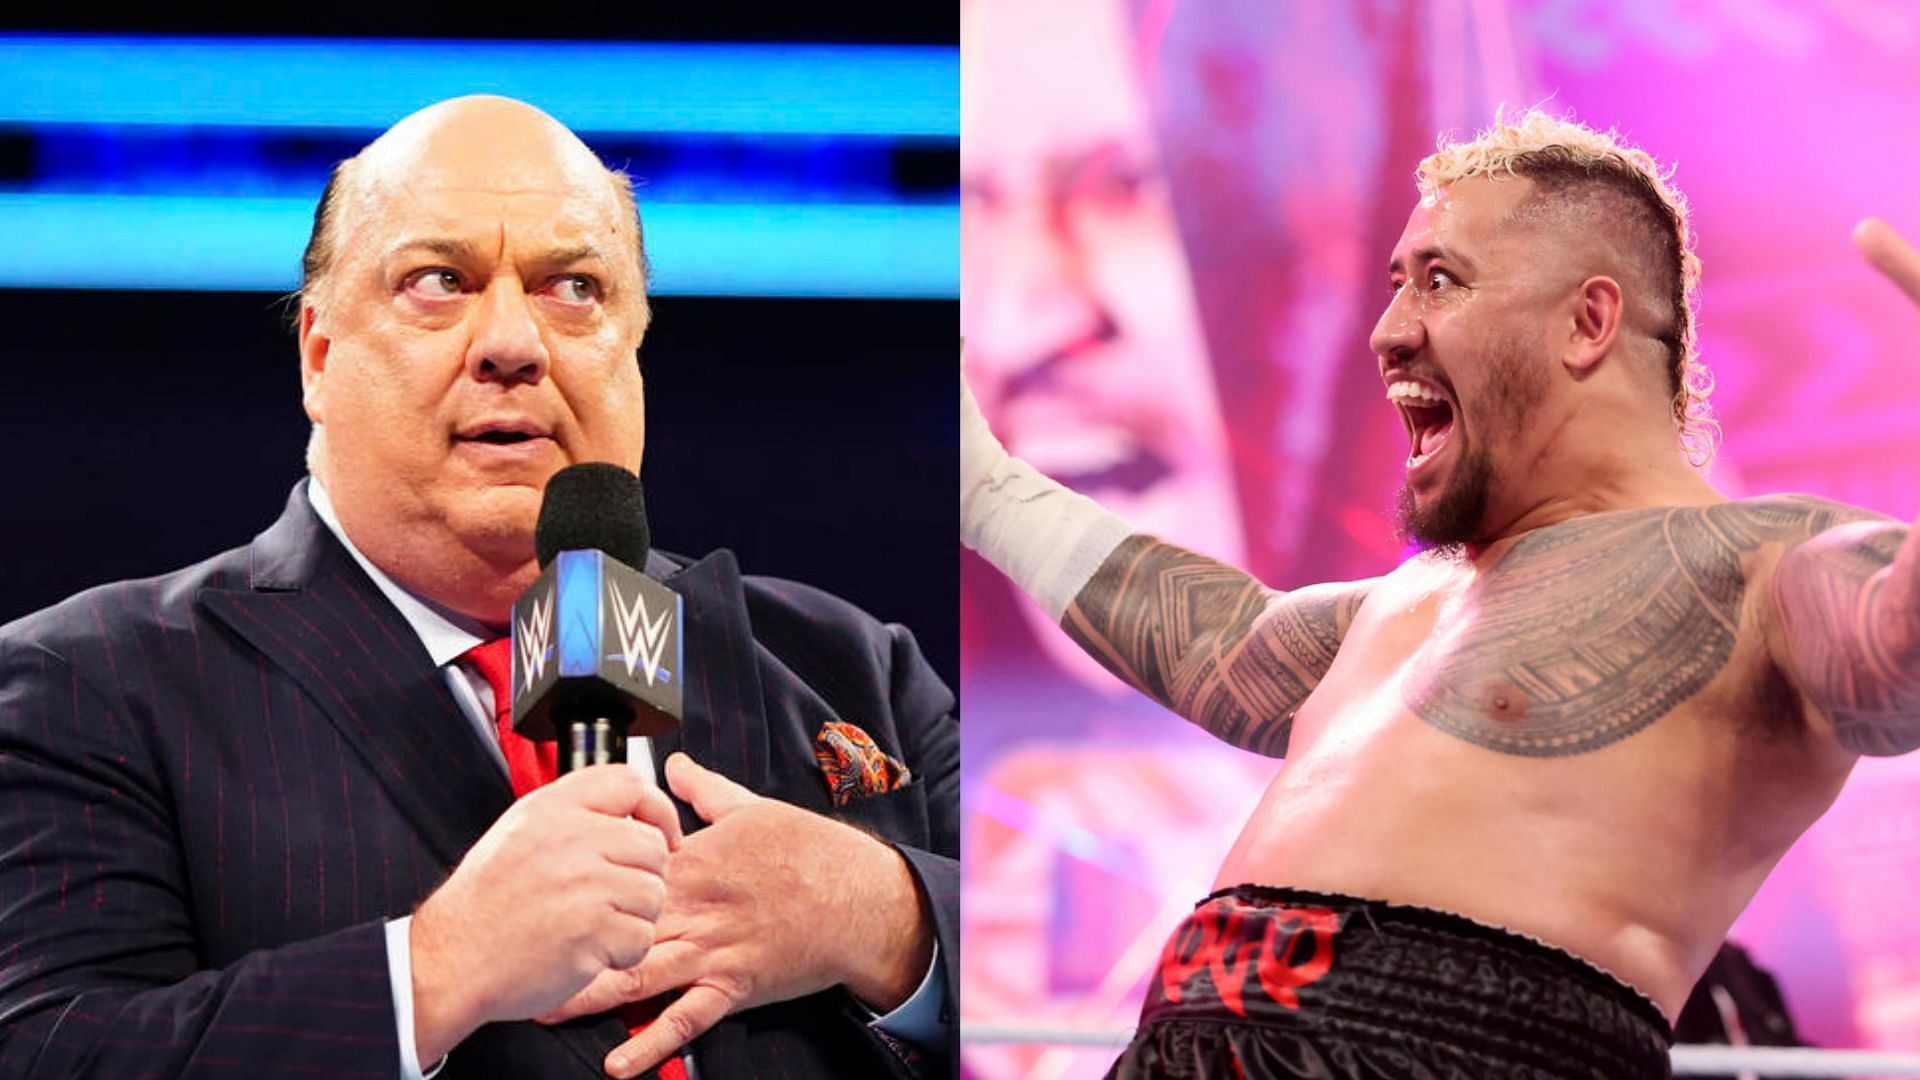 Paul Heyman and Solo Sikoa are members of The Bloodline